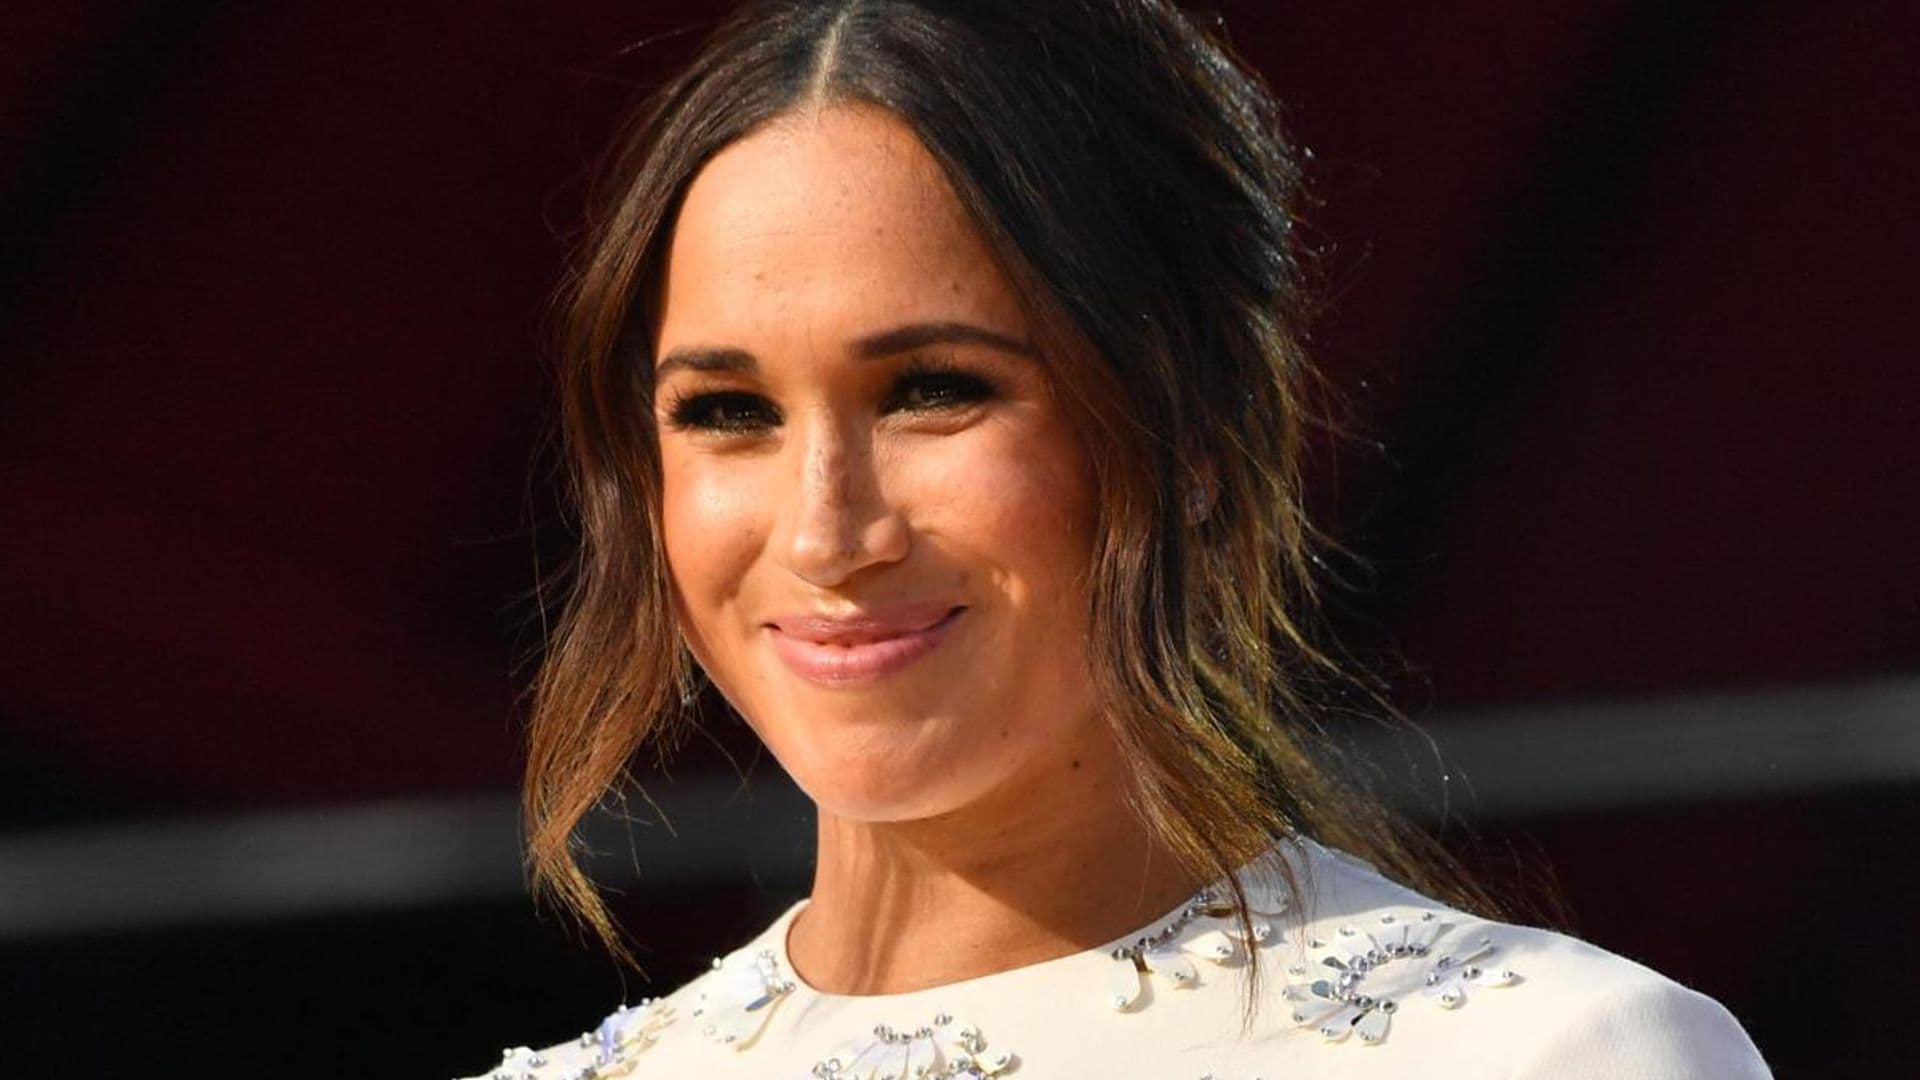 The name of Meghan Markle's podcast revealed-listen to a teaser